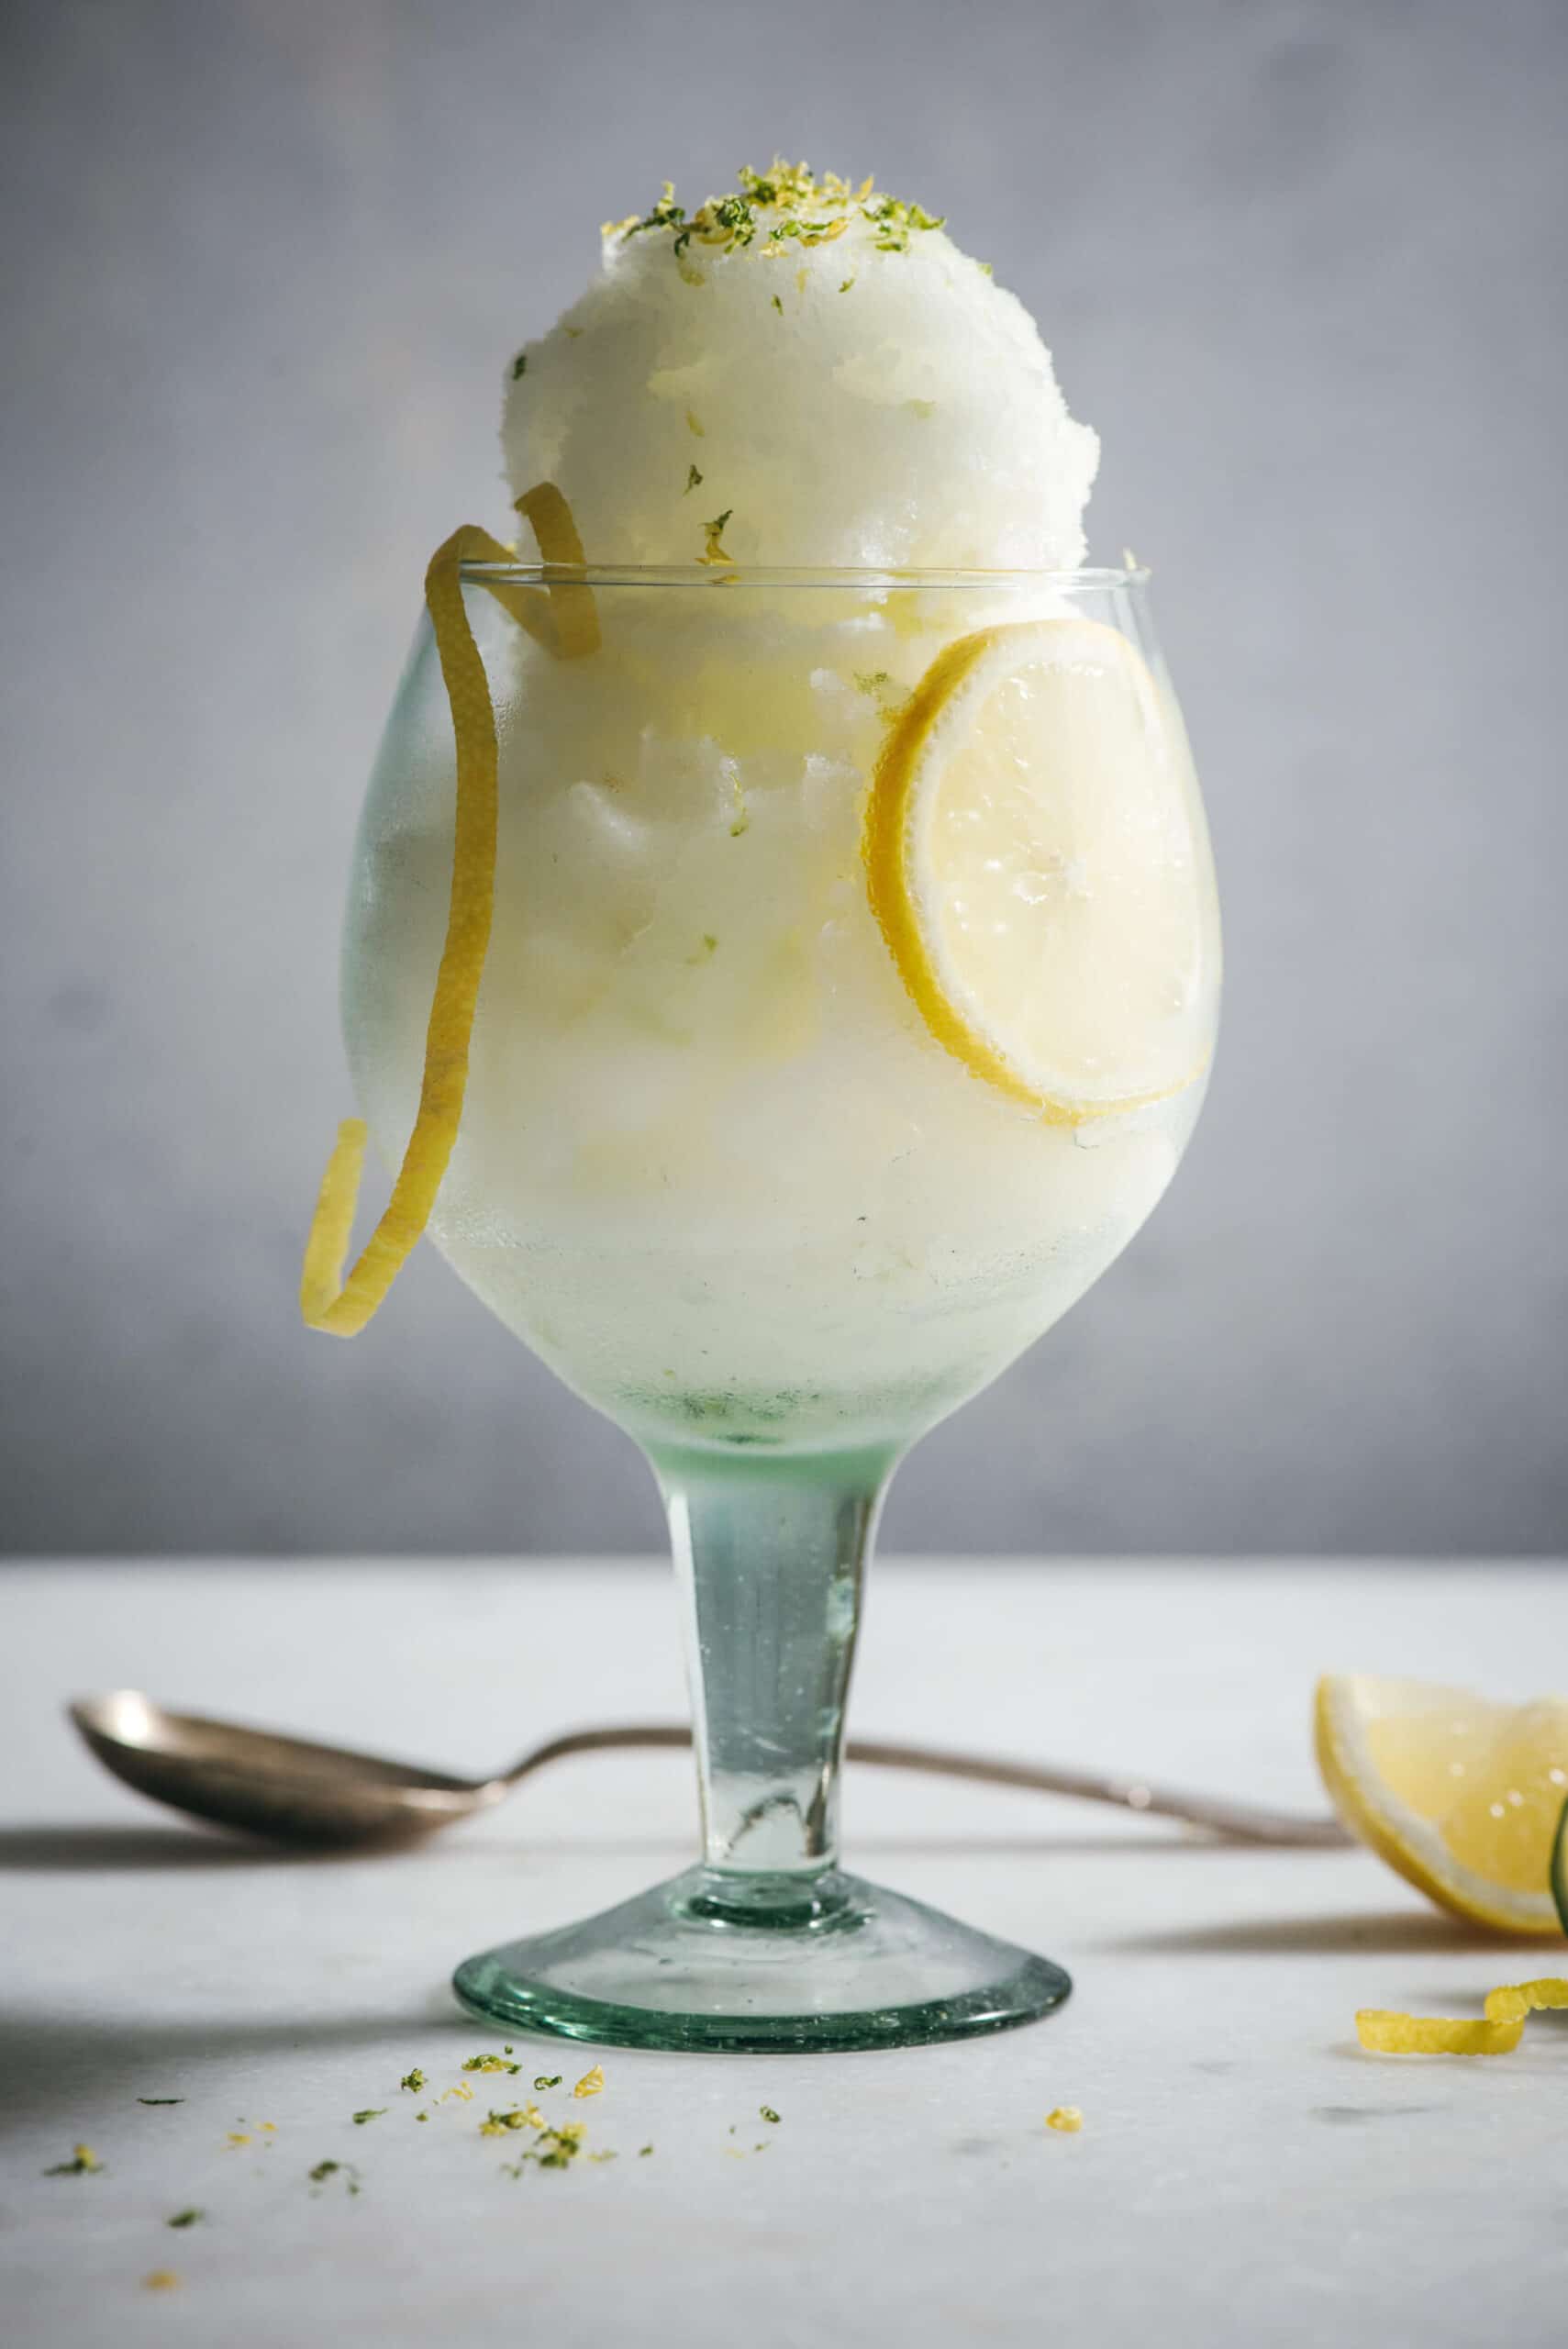 G and T sorbet in a glass